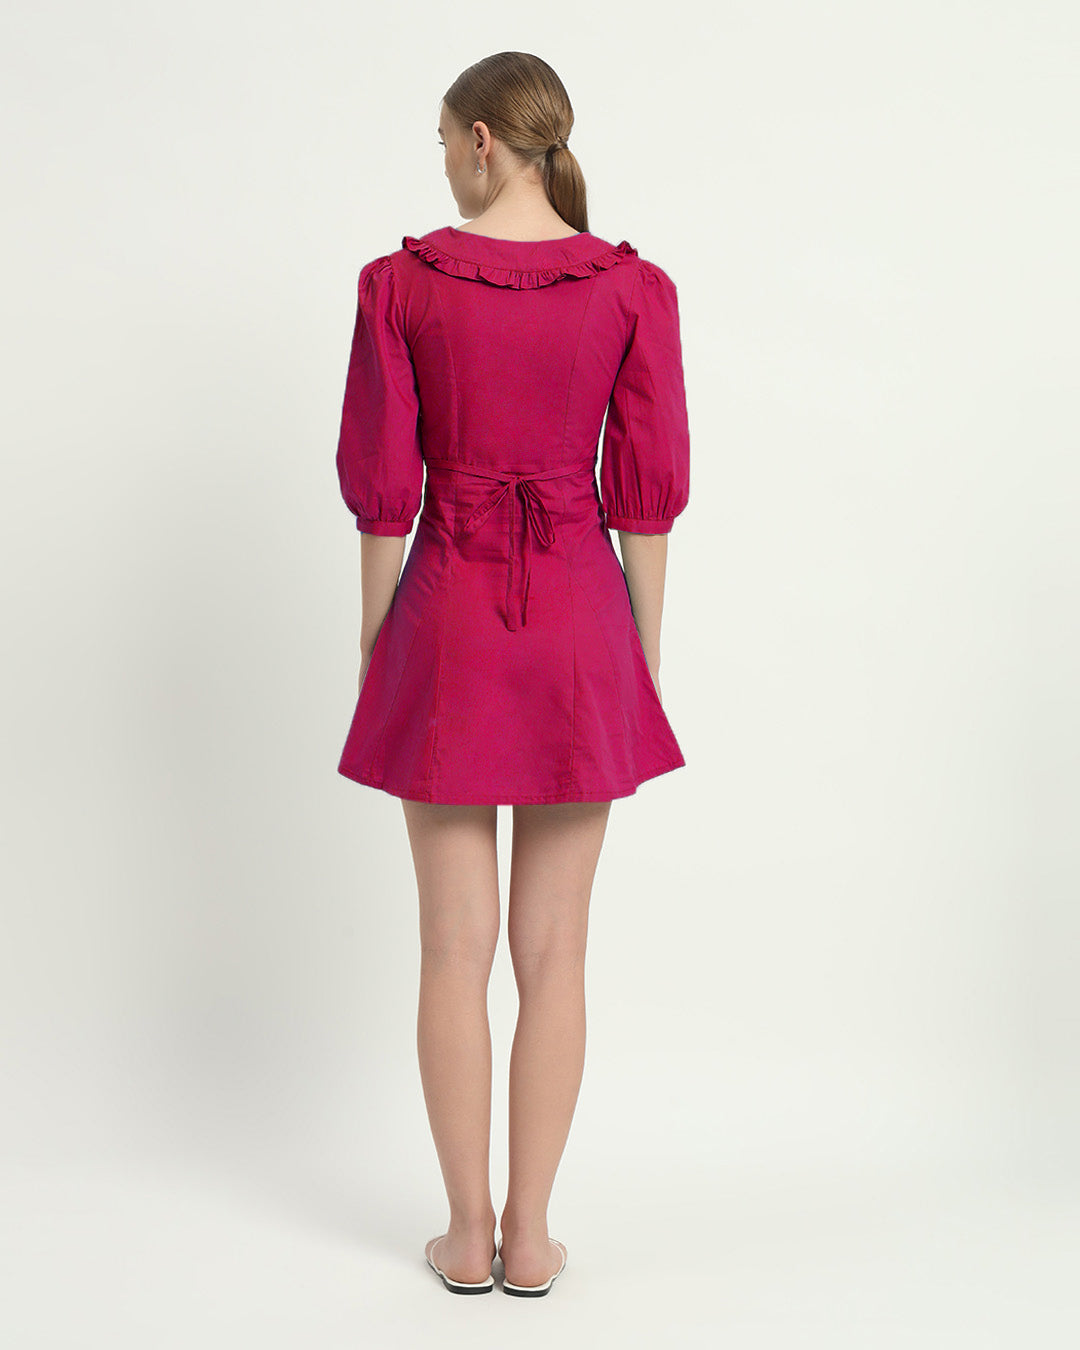 The Berry Isabela Cotton Dress